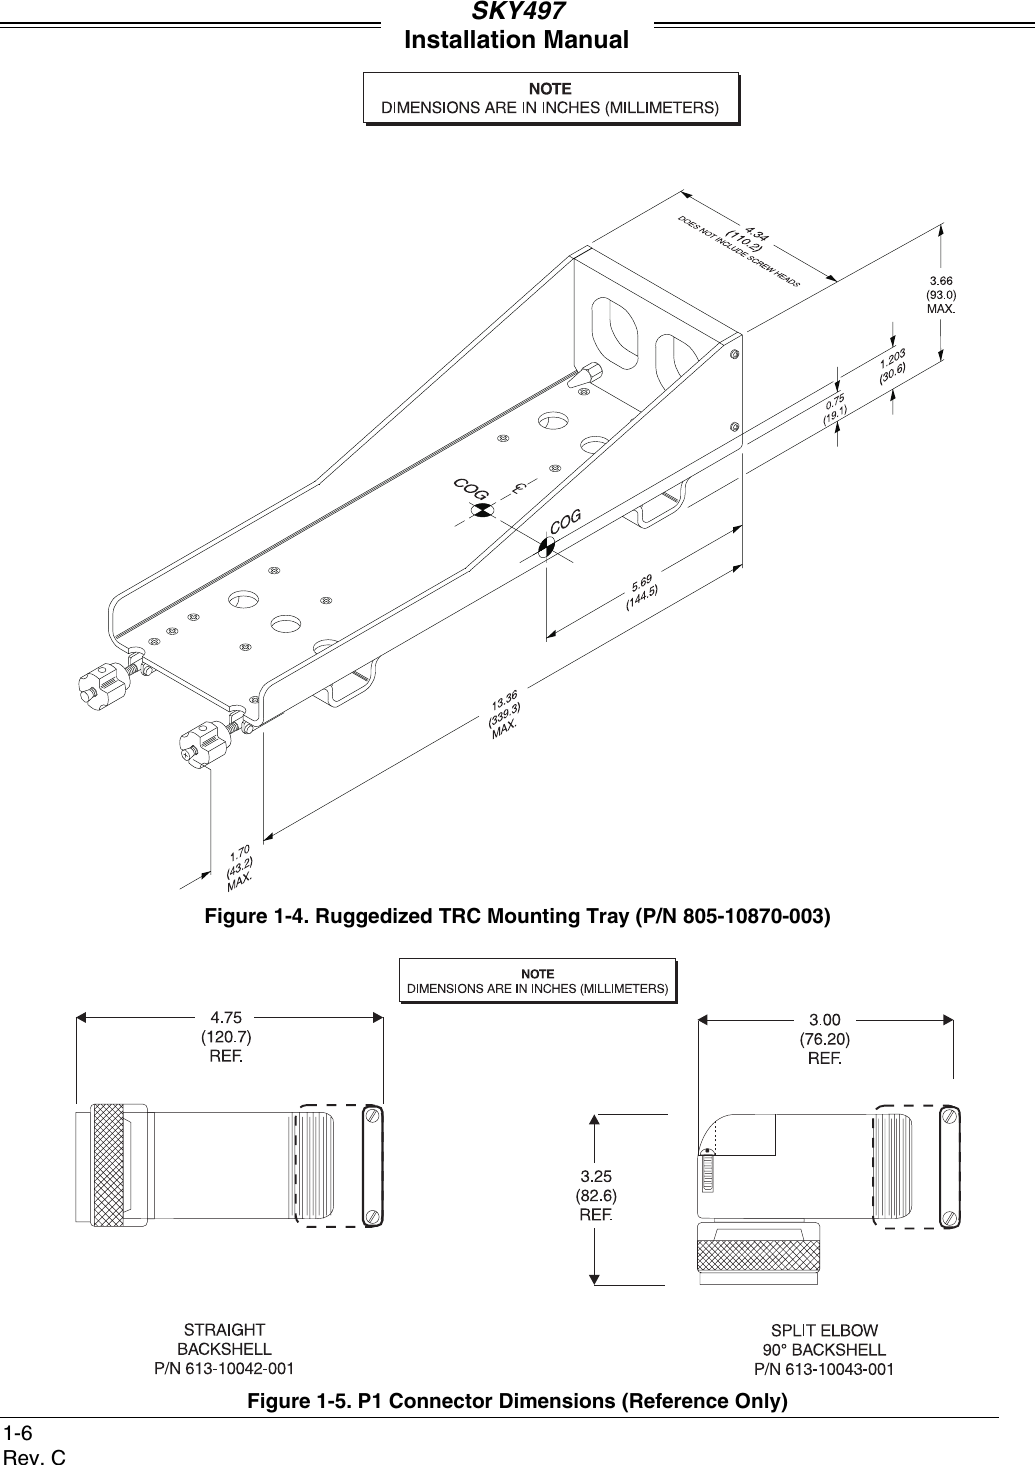 SKY497Installation Manual1-6Rev. CFigure 1-4. Ruggedized TRC Mounting Tray (P/N 805-10870-003)Figure 1-5. P1 Connector Dimensions (Reference Only)